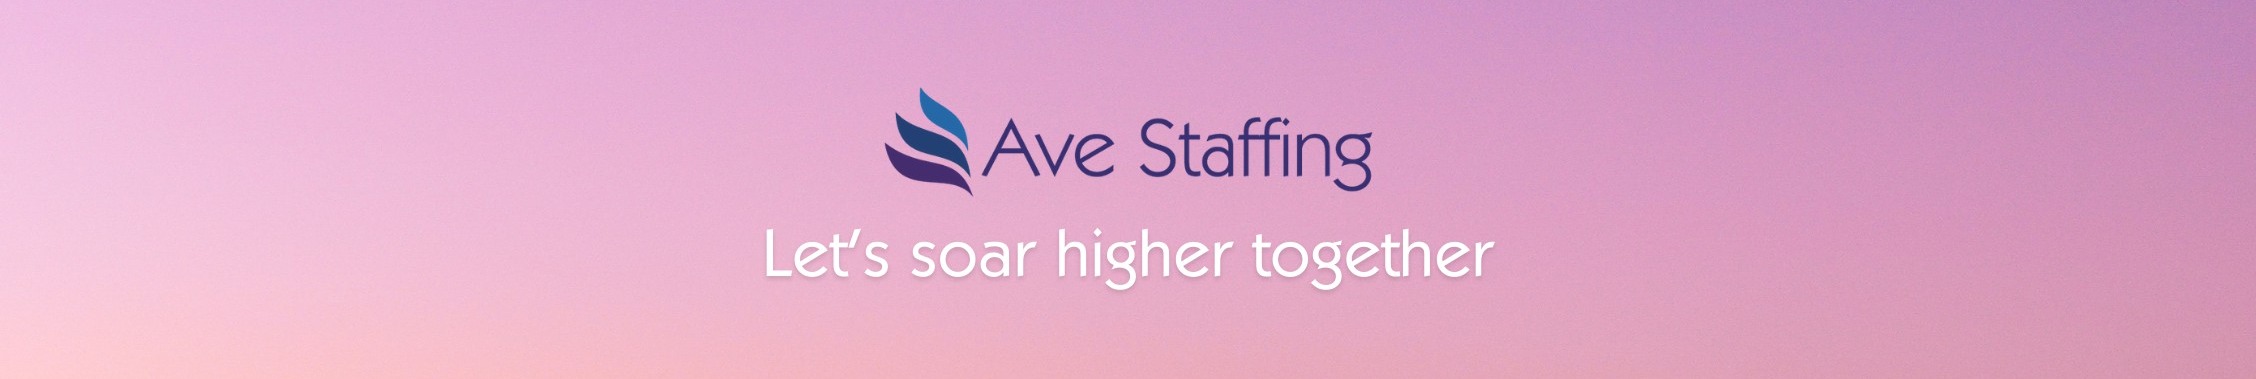 Ave Staffing Legal Specialists background